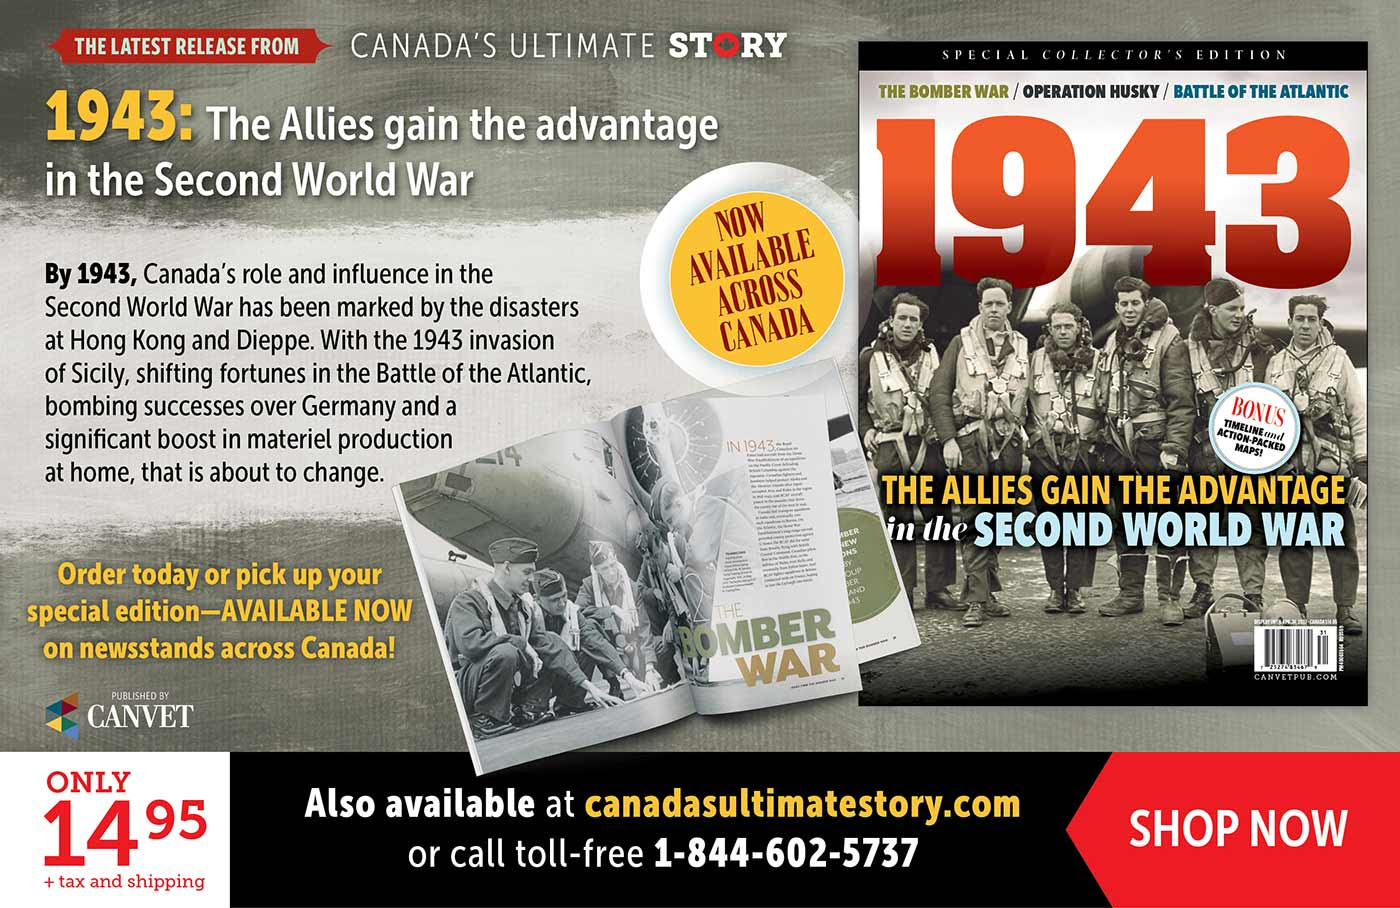 The latest release from Canada's Ultimate Story. Special collectors edition. 1943: The Allies gain the advantage in the Second World War. Only $14.95 + tax and shipping. Shop now.